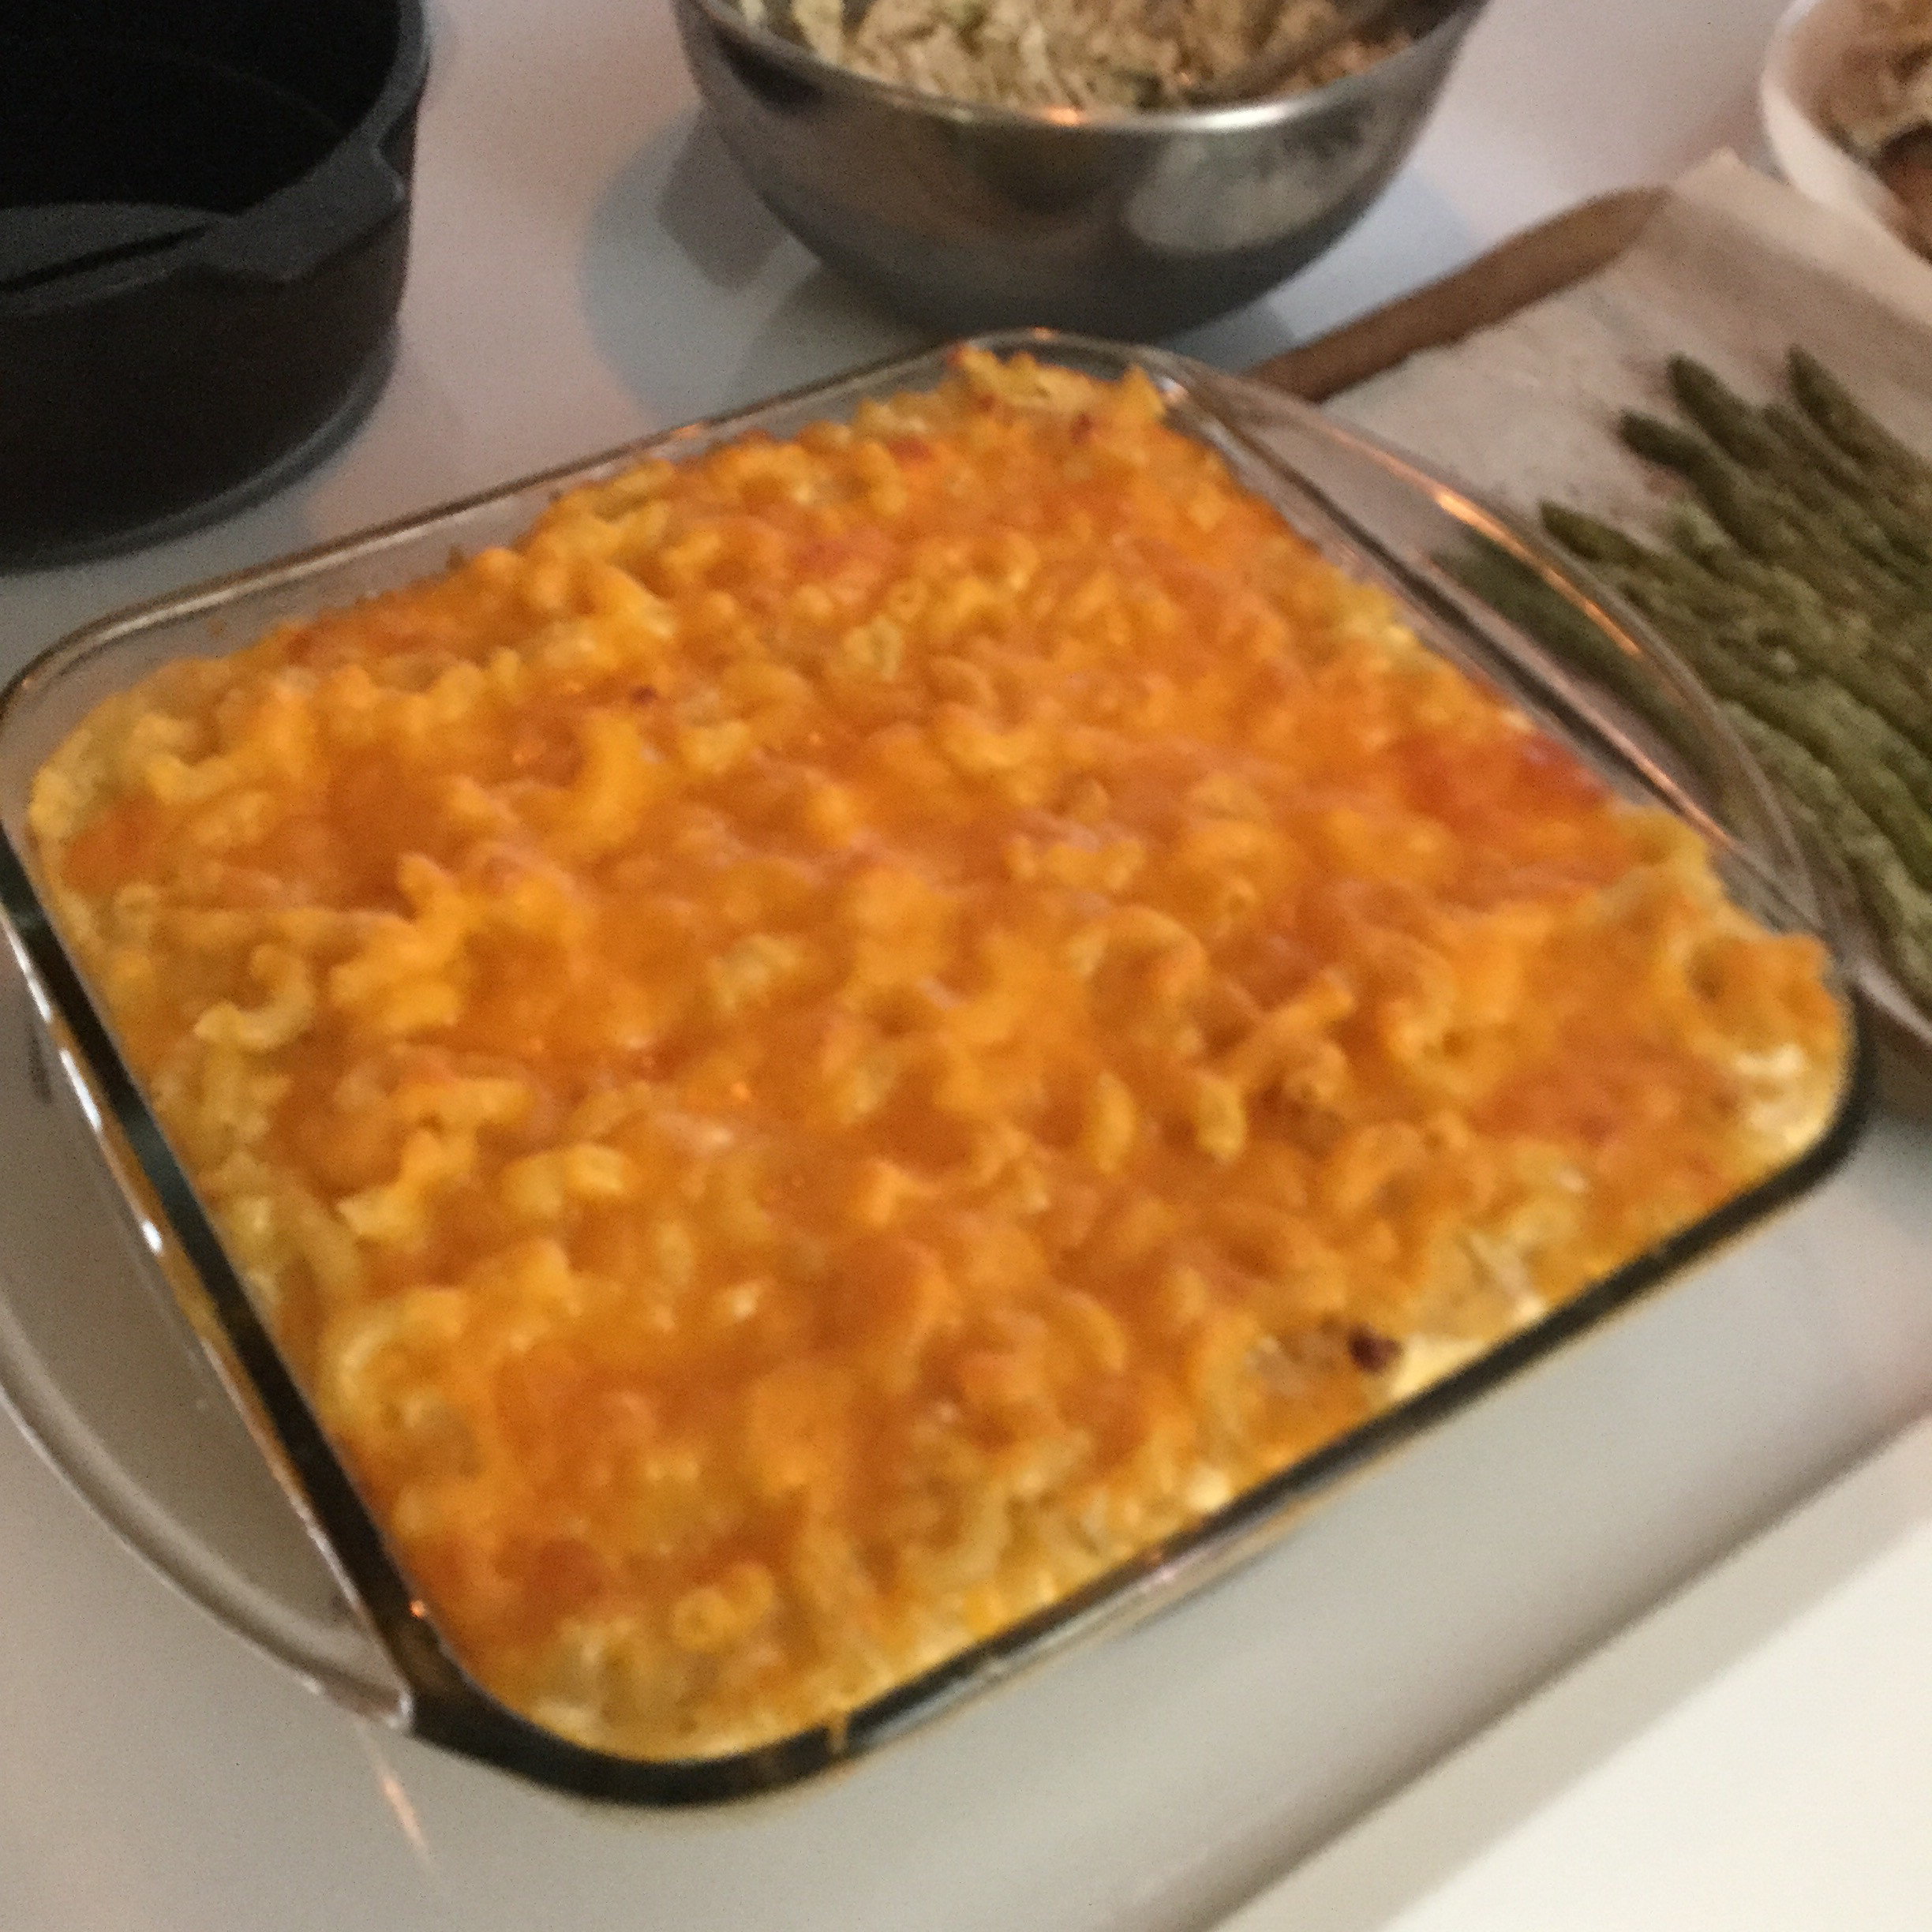 Baked Macaroni And Cheese Recipes With Sour Cream
 Baked Mac and Cheese with Sour Cream and Cottage Cheese